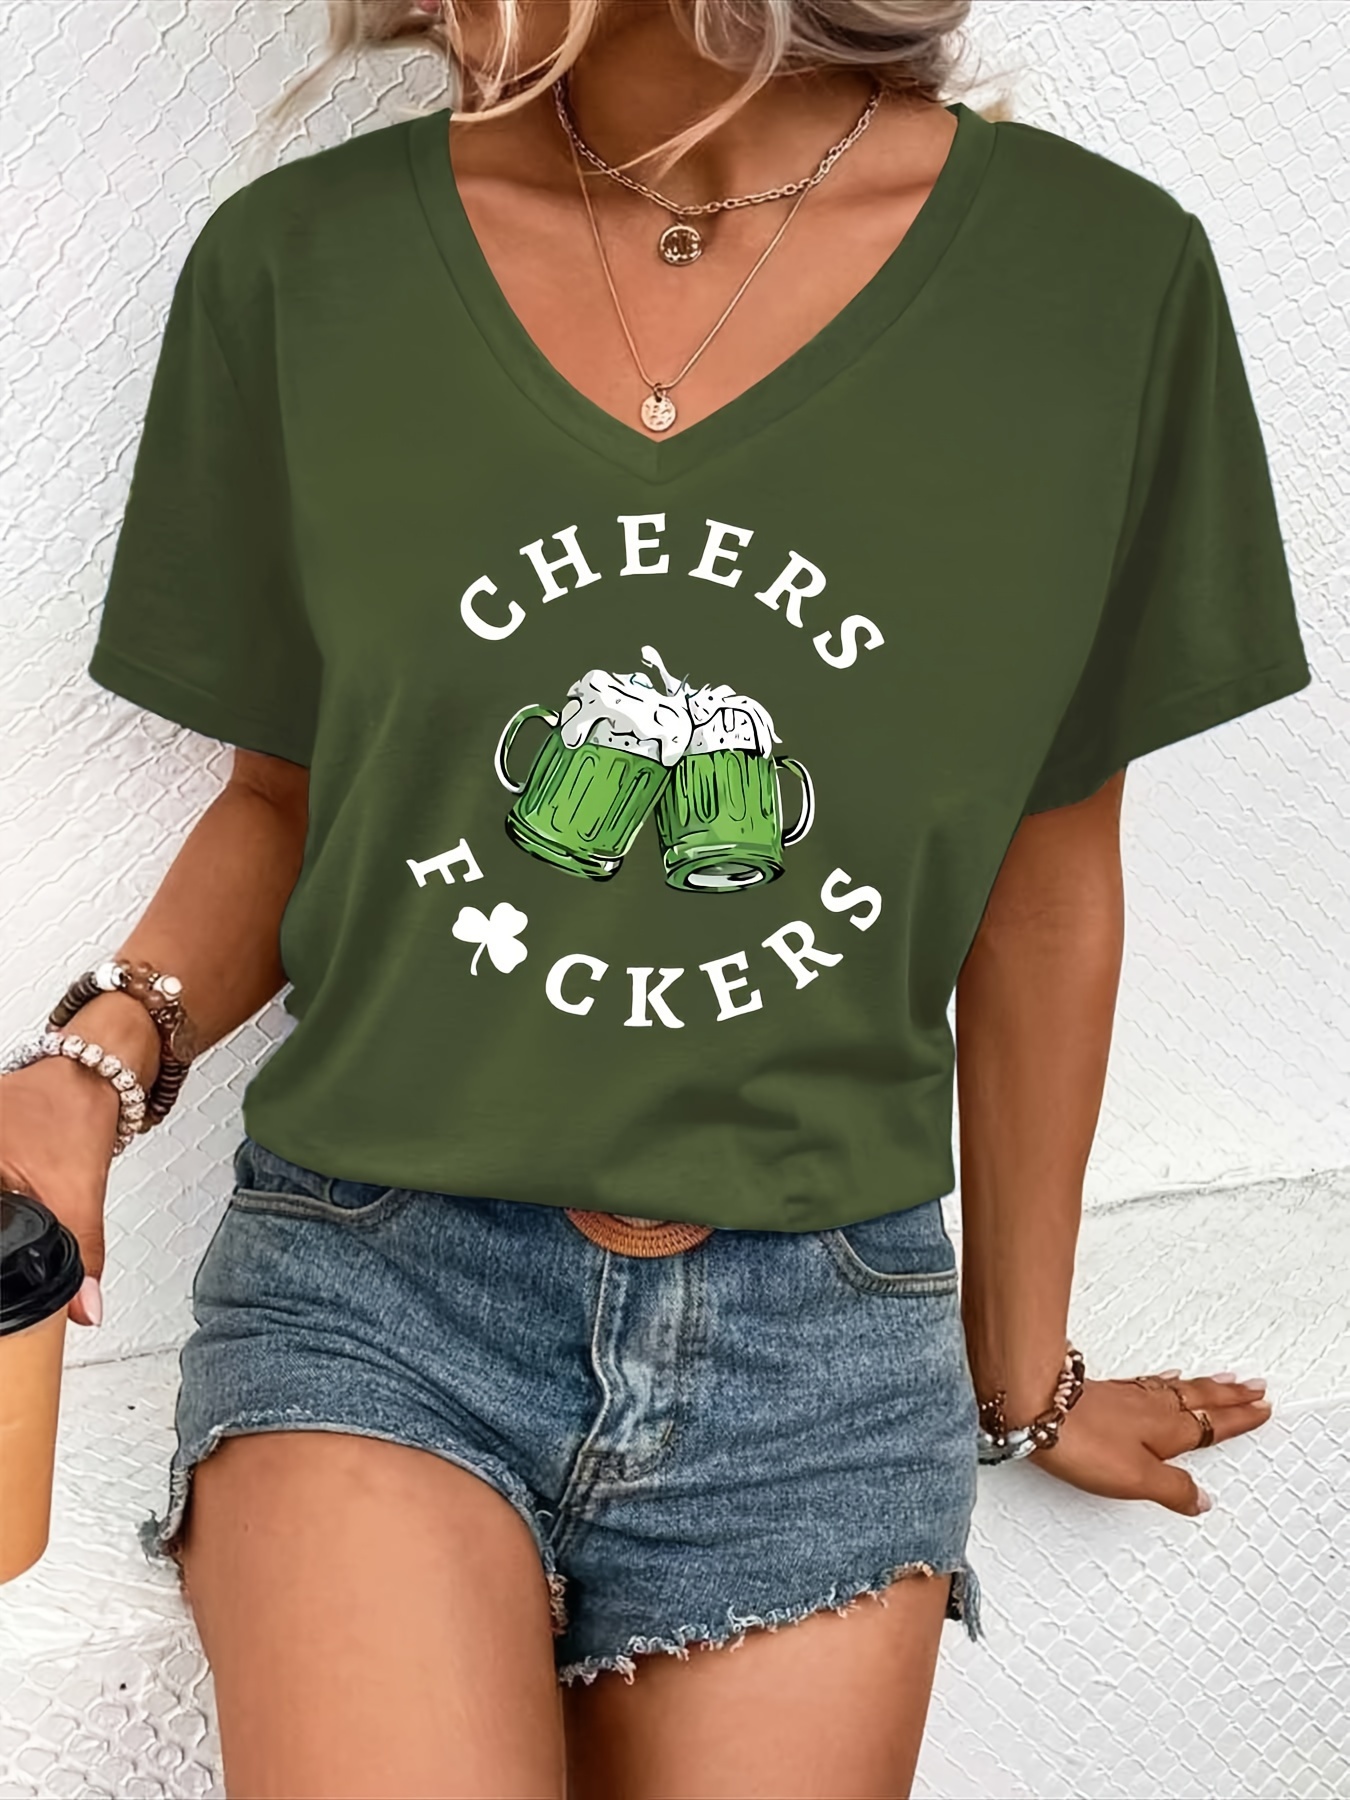 drink letter print casual t shirt v neck short sleeves stretchy sports tee st patricks day womens comfy tops details 3